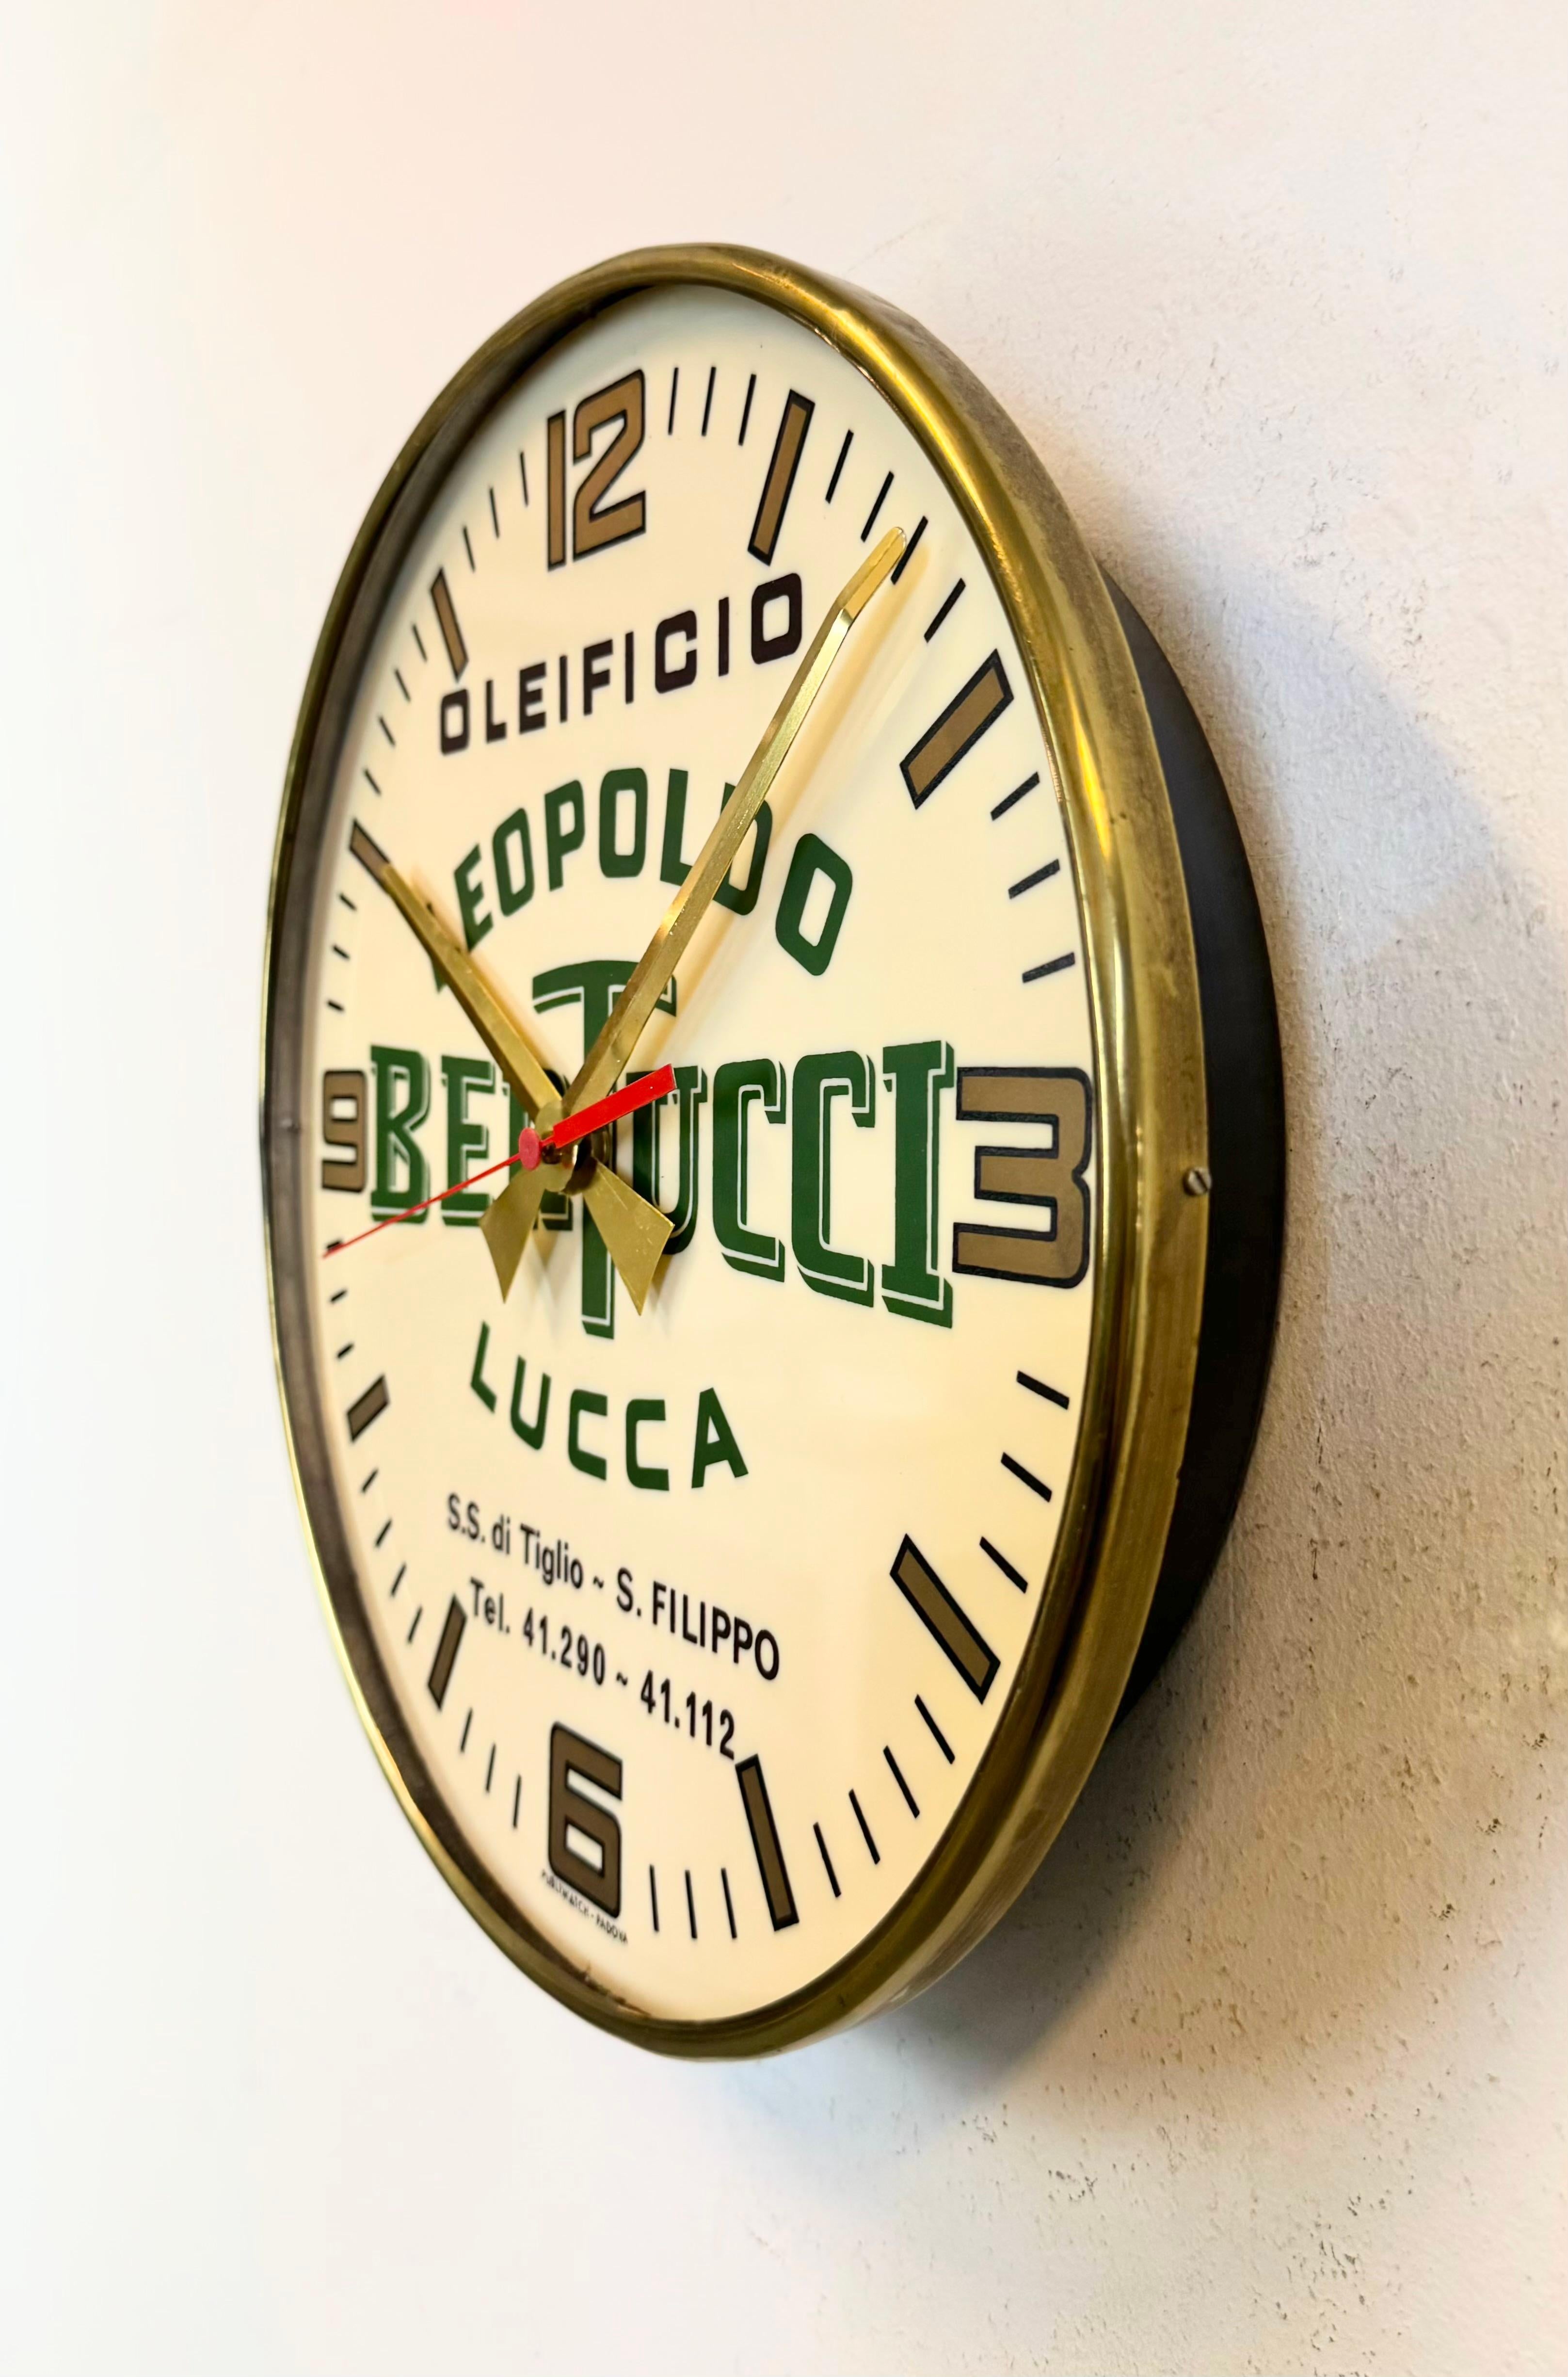 Vintage Italian Advertising Wall Clock, 1970s In Good Condition For Sale In Kojetice, CZ